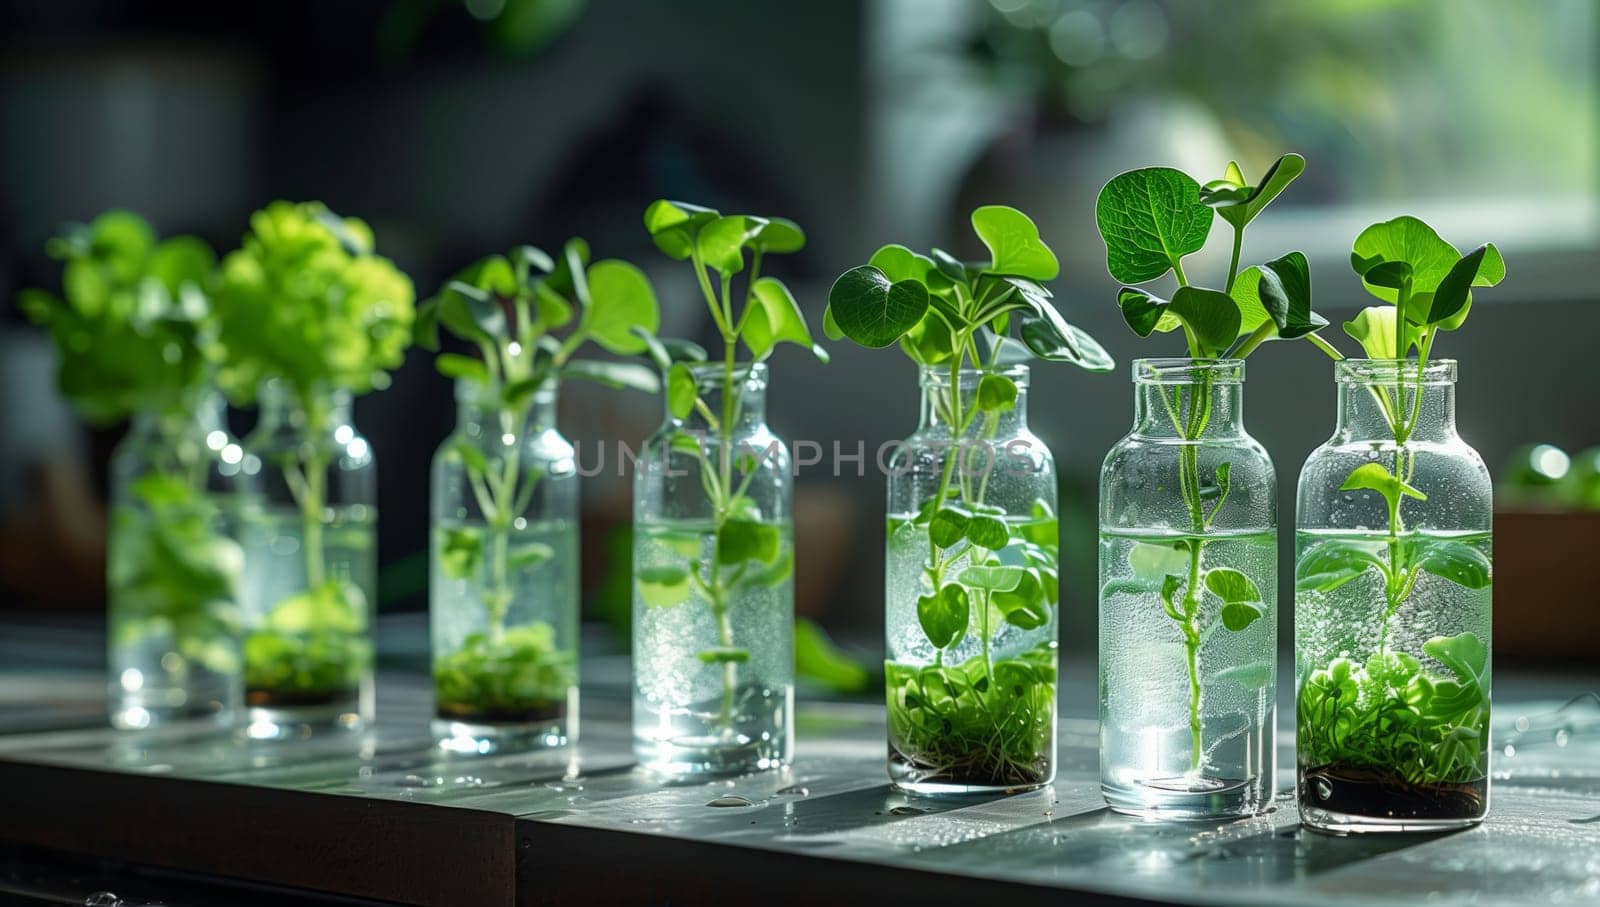 A series of drinkware containers filled with liquid and plants, including terrestrial plants and grass, placed neatly in a row on a table